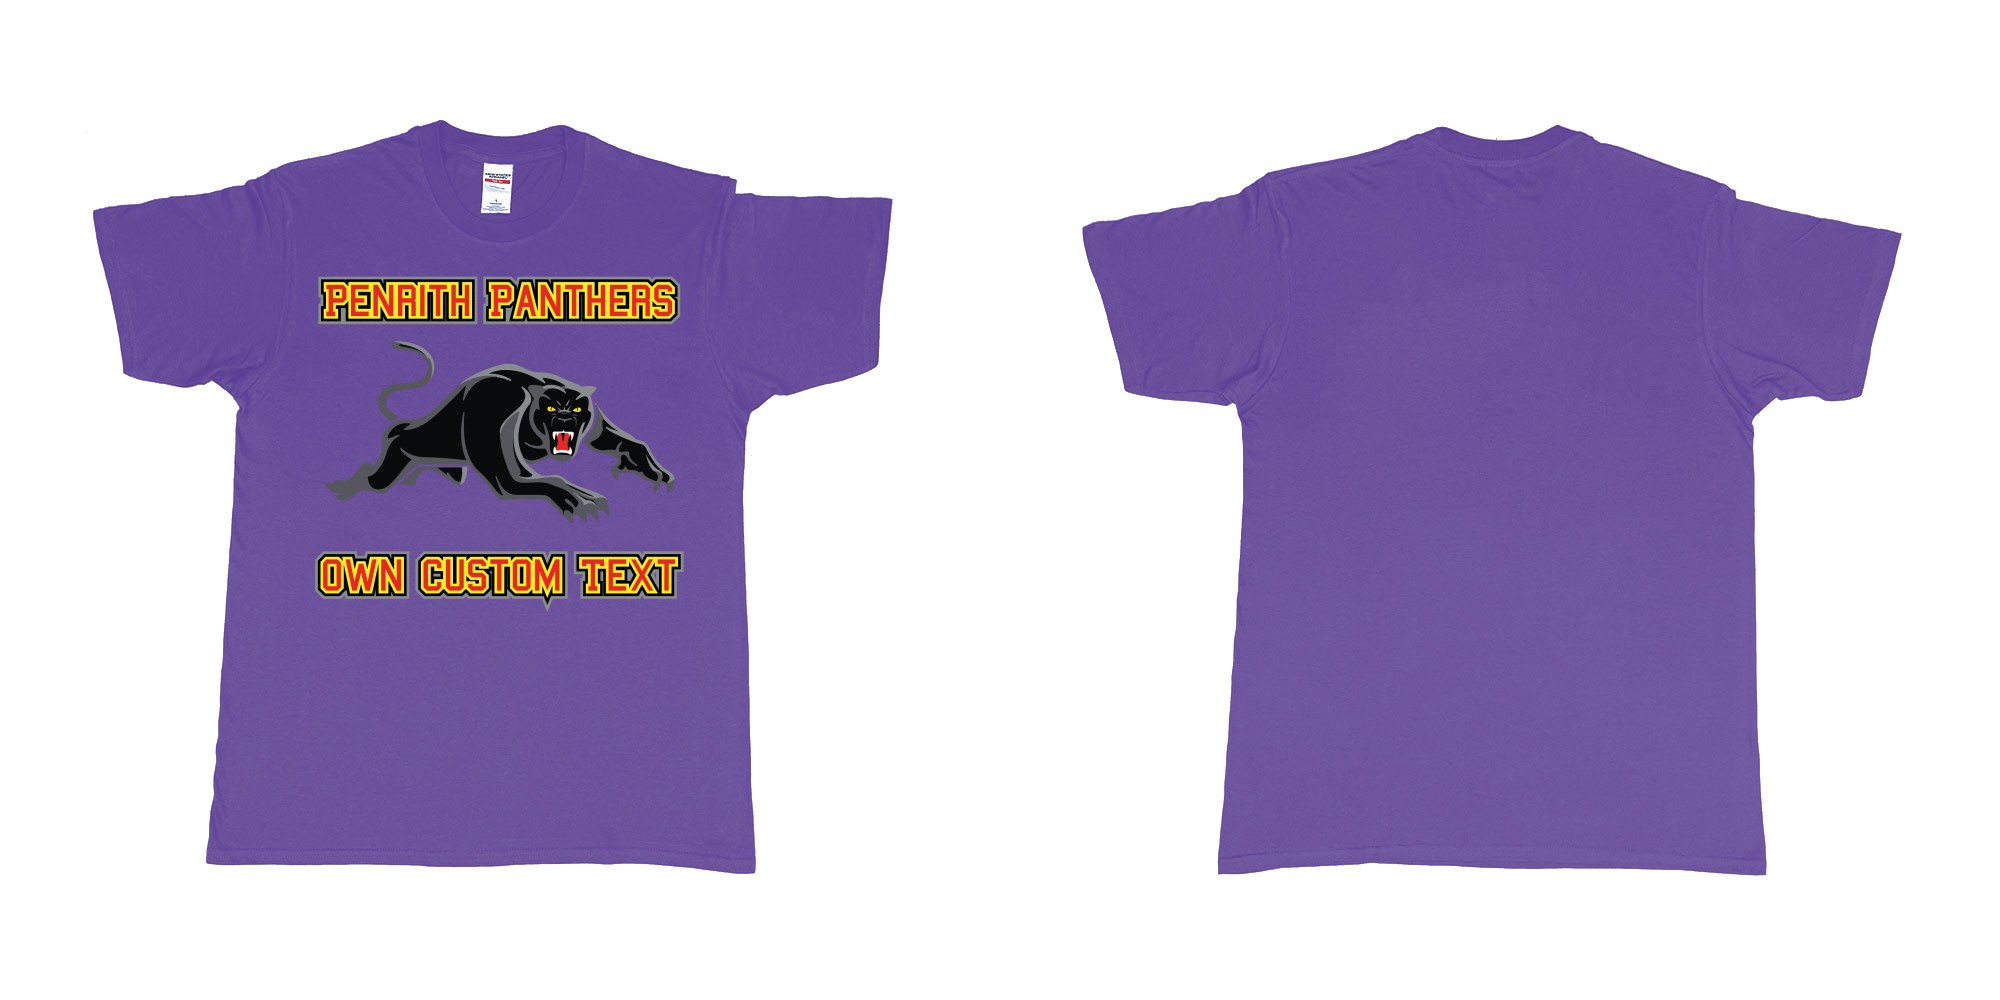 Custom tshirt design penrith panthers logo on demand custom printing in fabric color purple choice your own text made in Bali by The Pirate Way